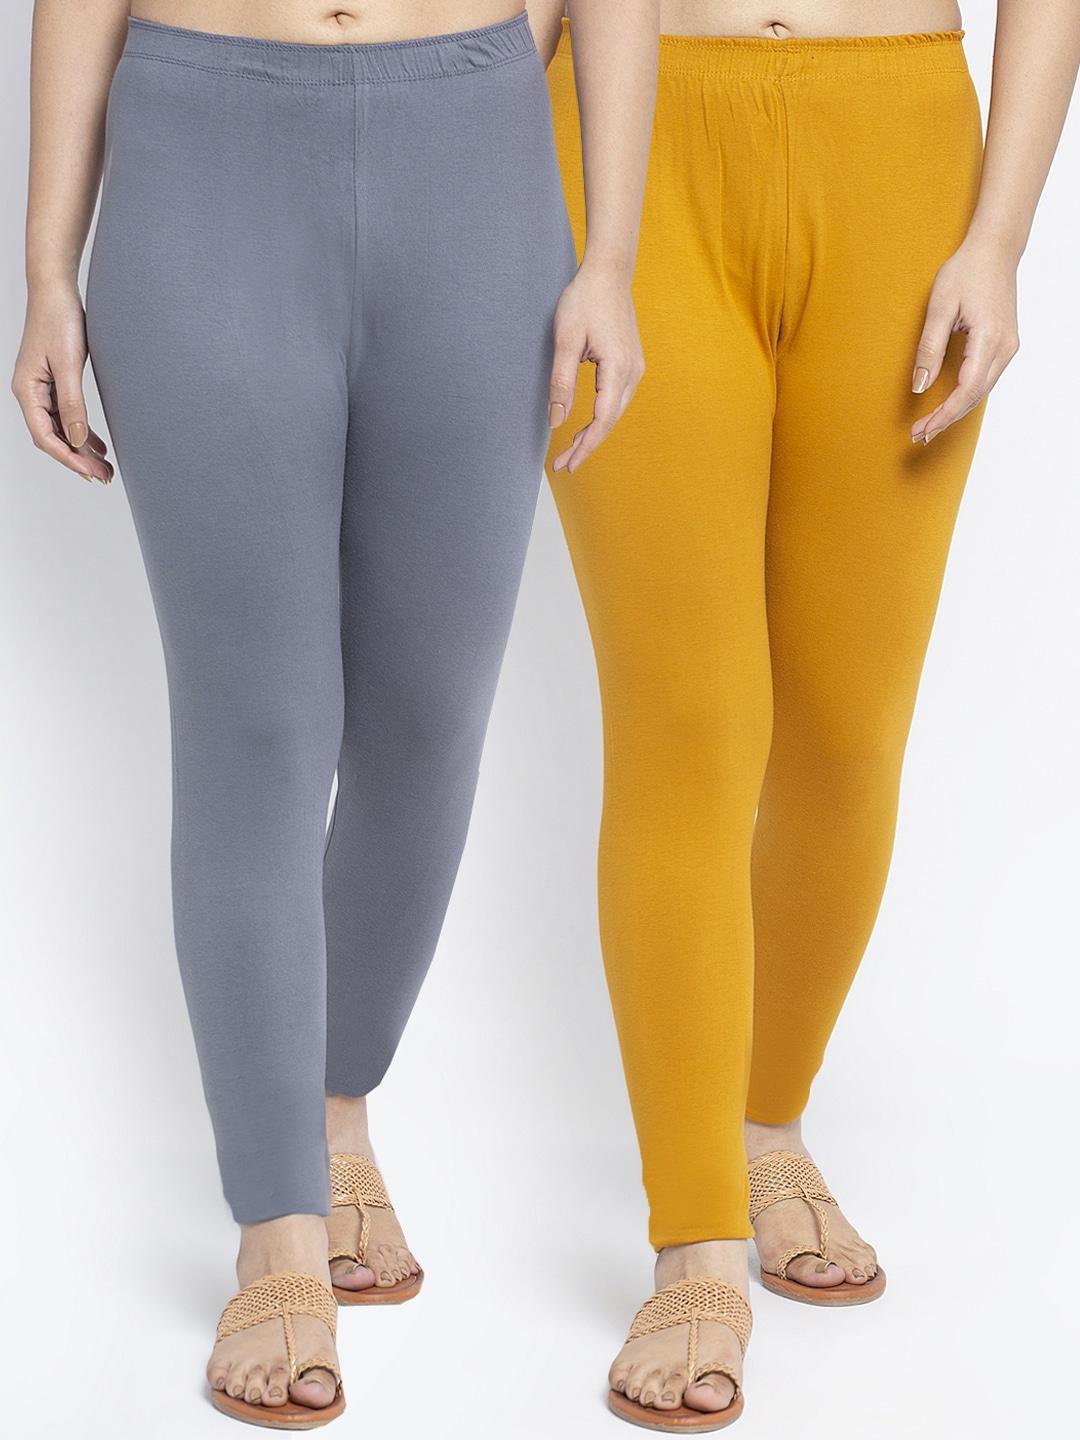 gracit-women-grey-&-yellow-pack-of-2-solid-ankle-length-leggings